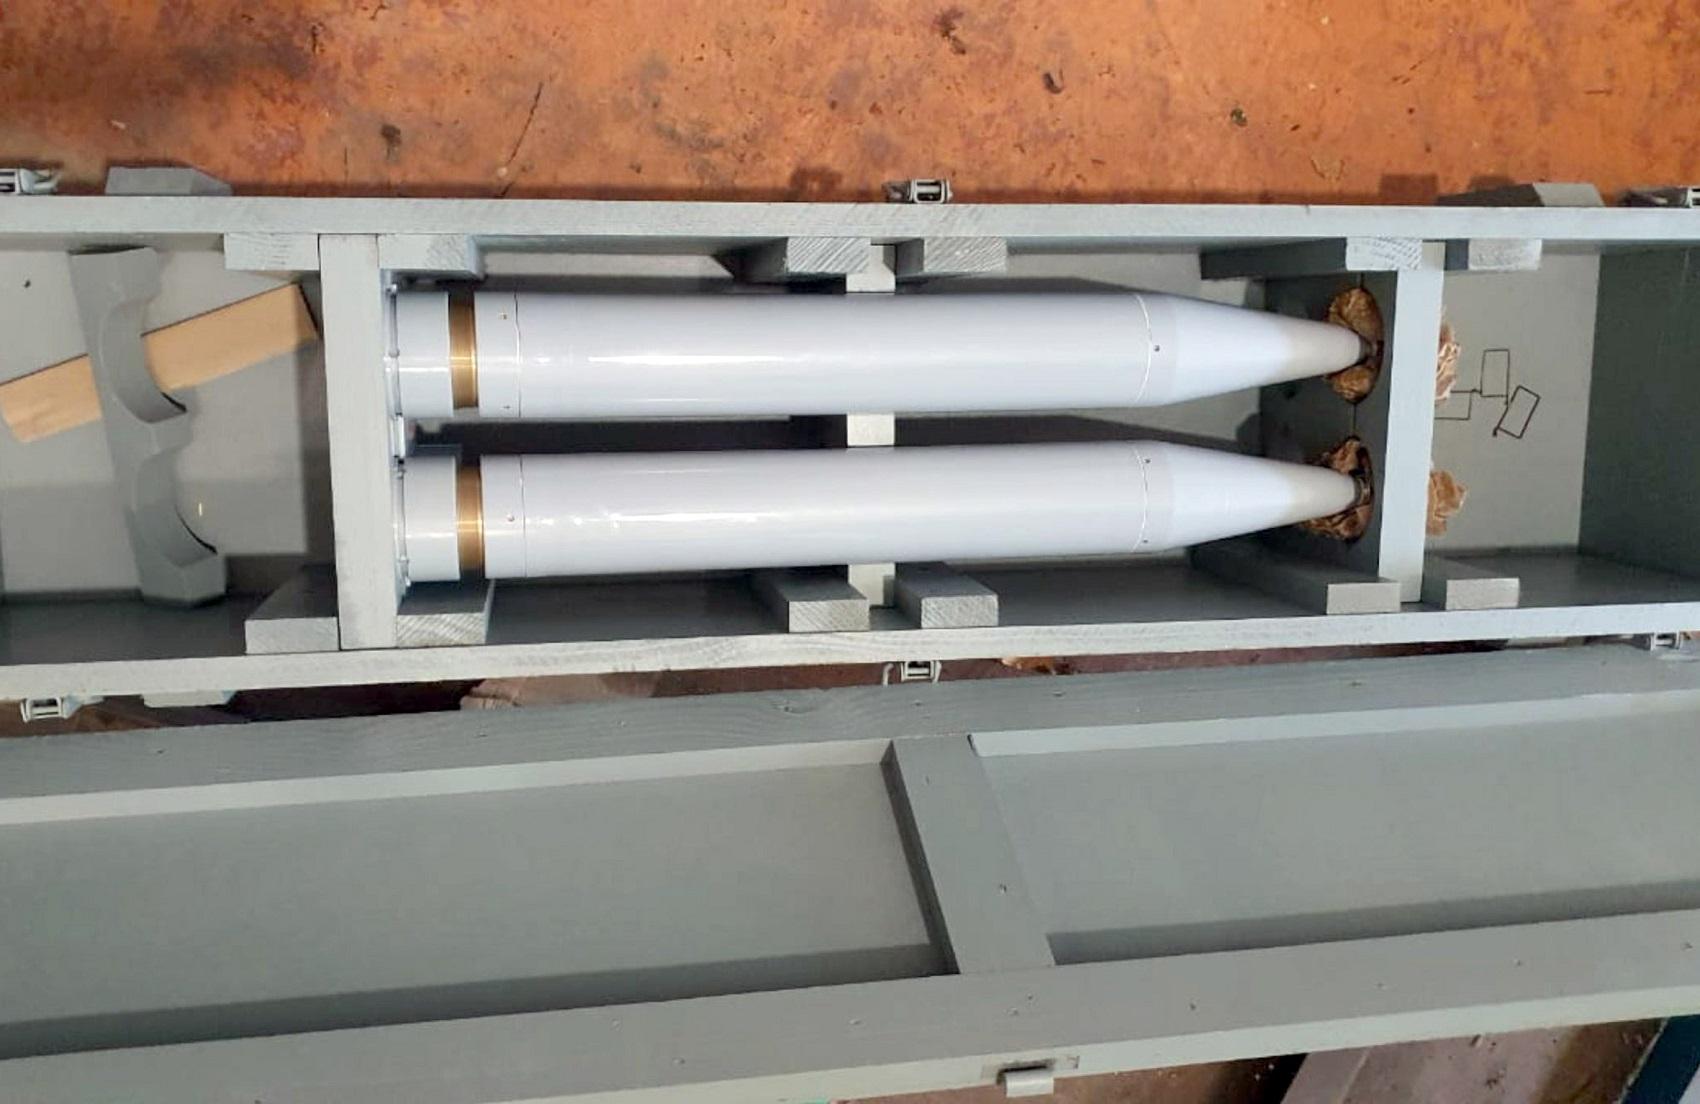 Artem Successfully Tests RS-80 Air-fuelled Warhead Unguided Aircraft Rocket Prototype